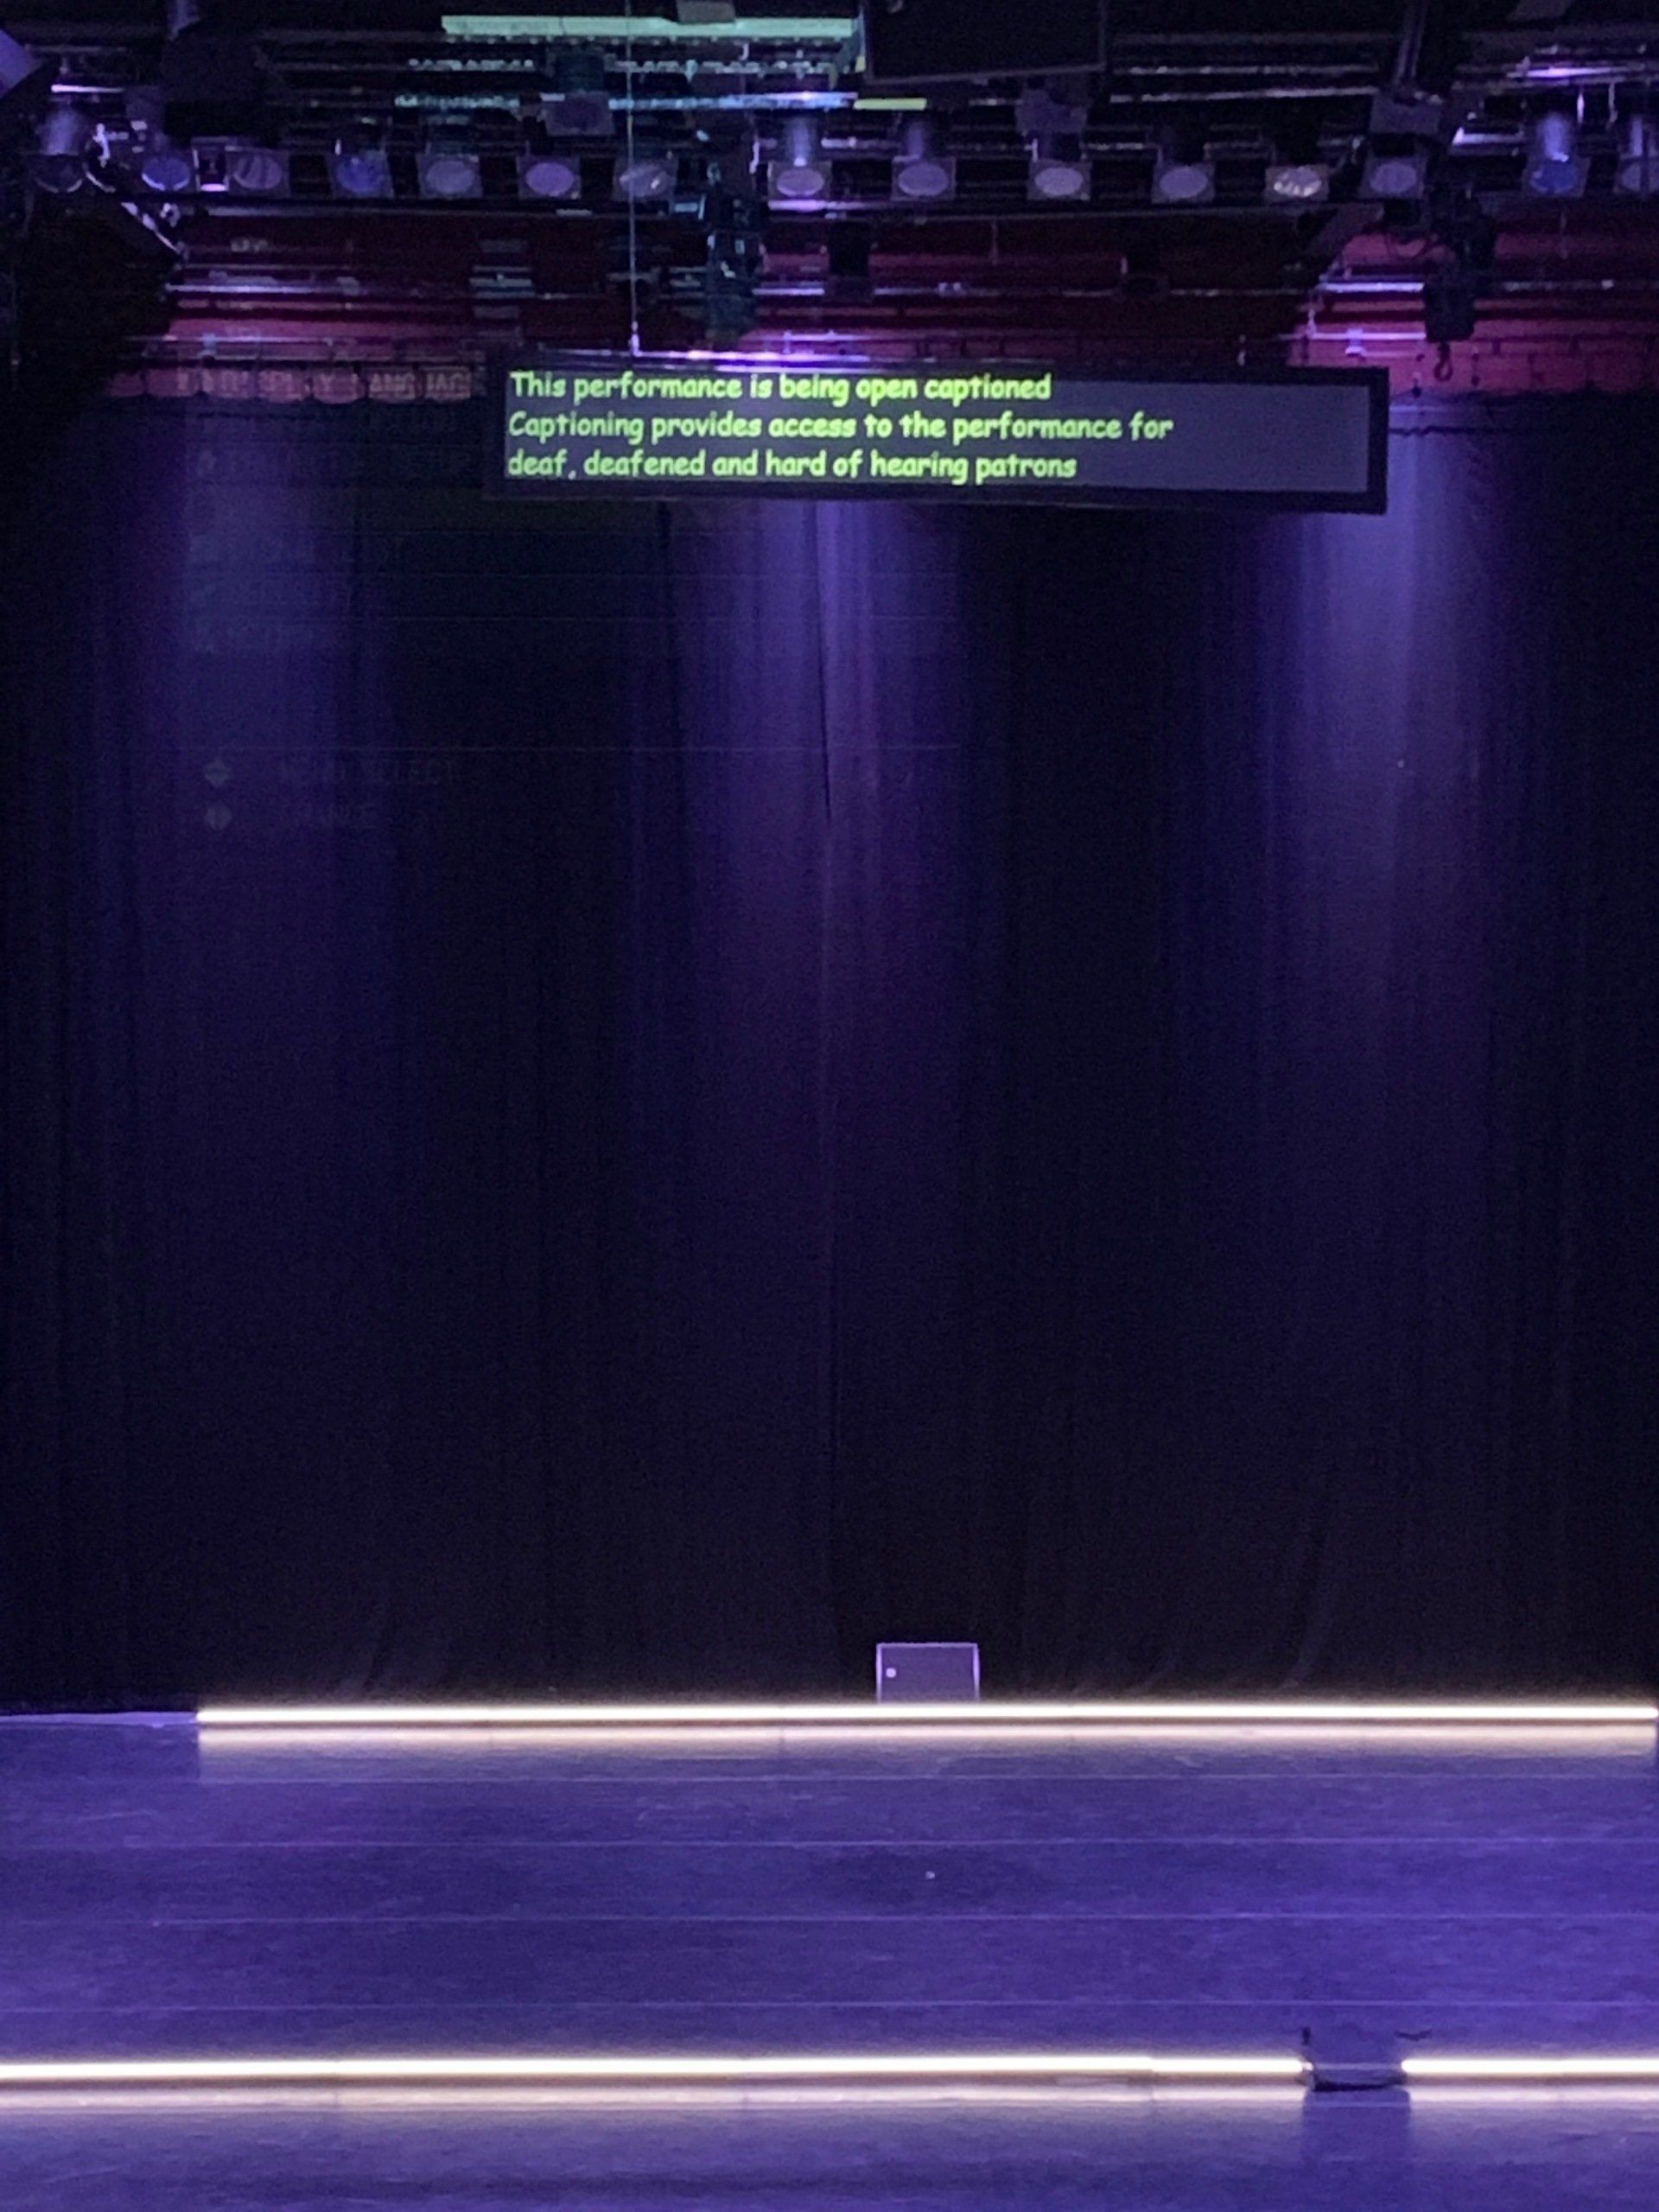 Hanging letterbox display of captions over empty stage.